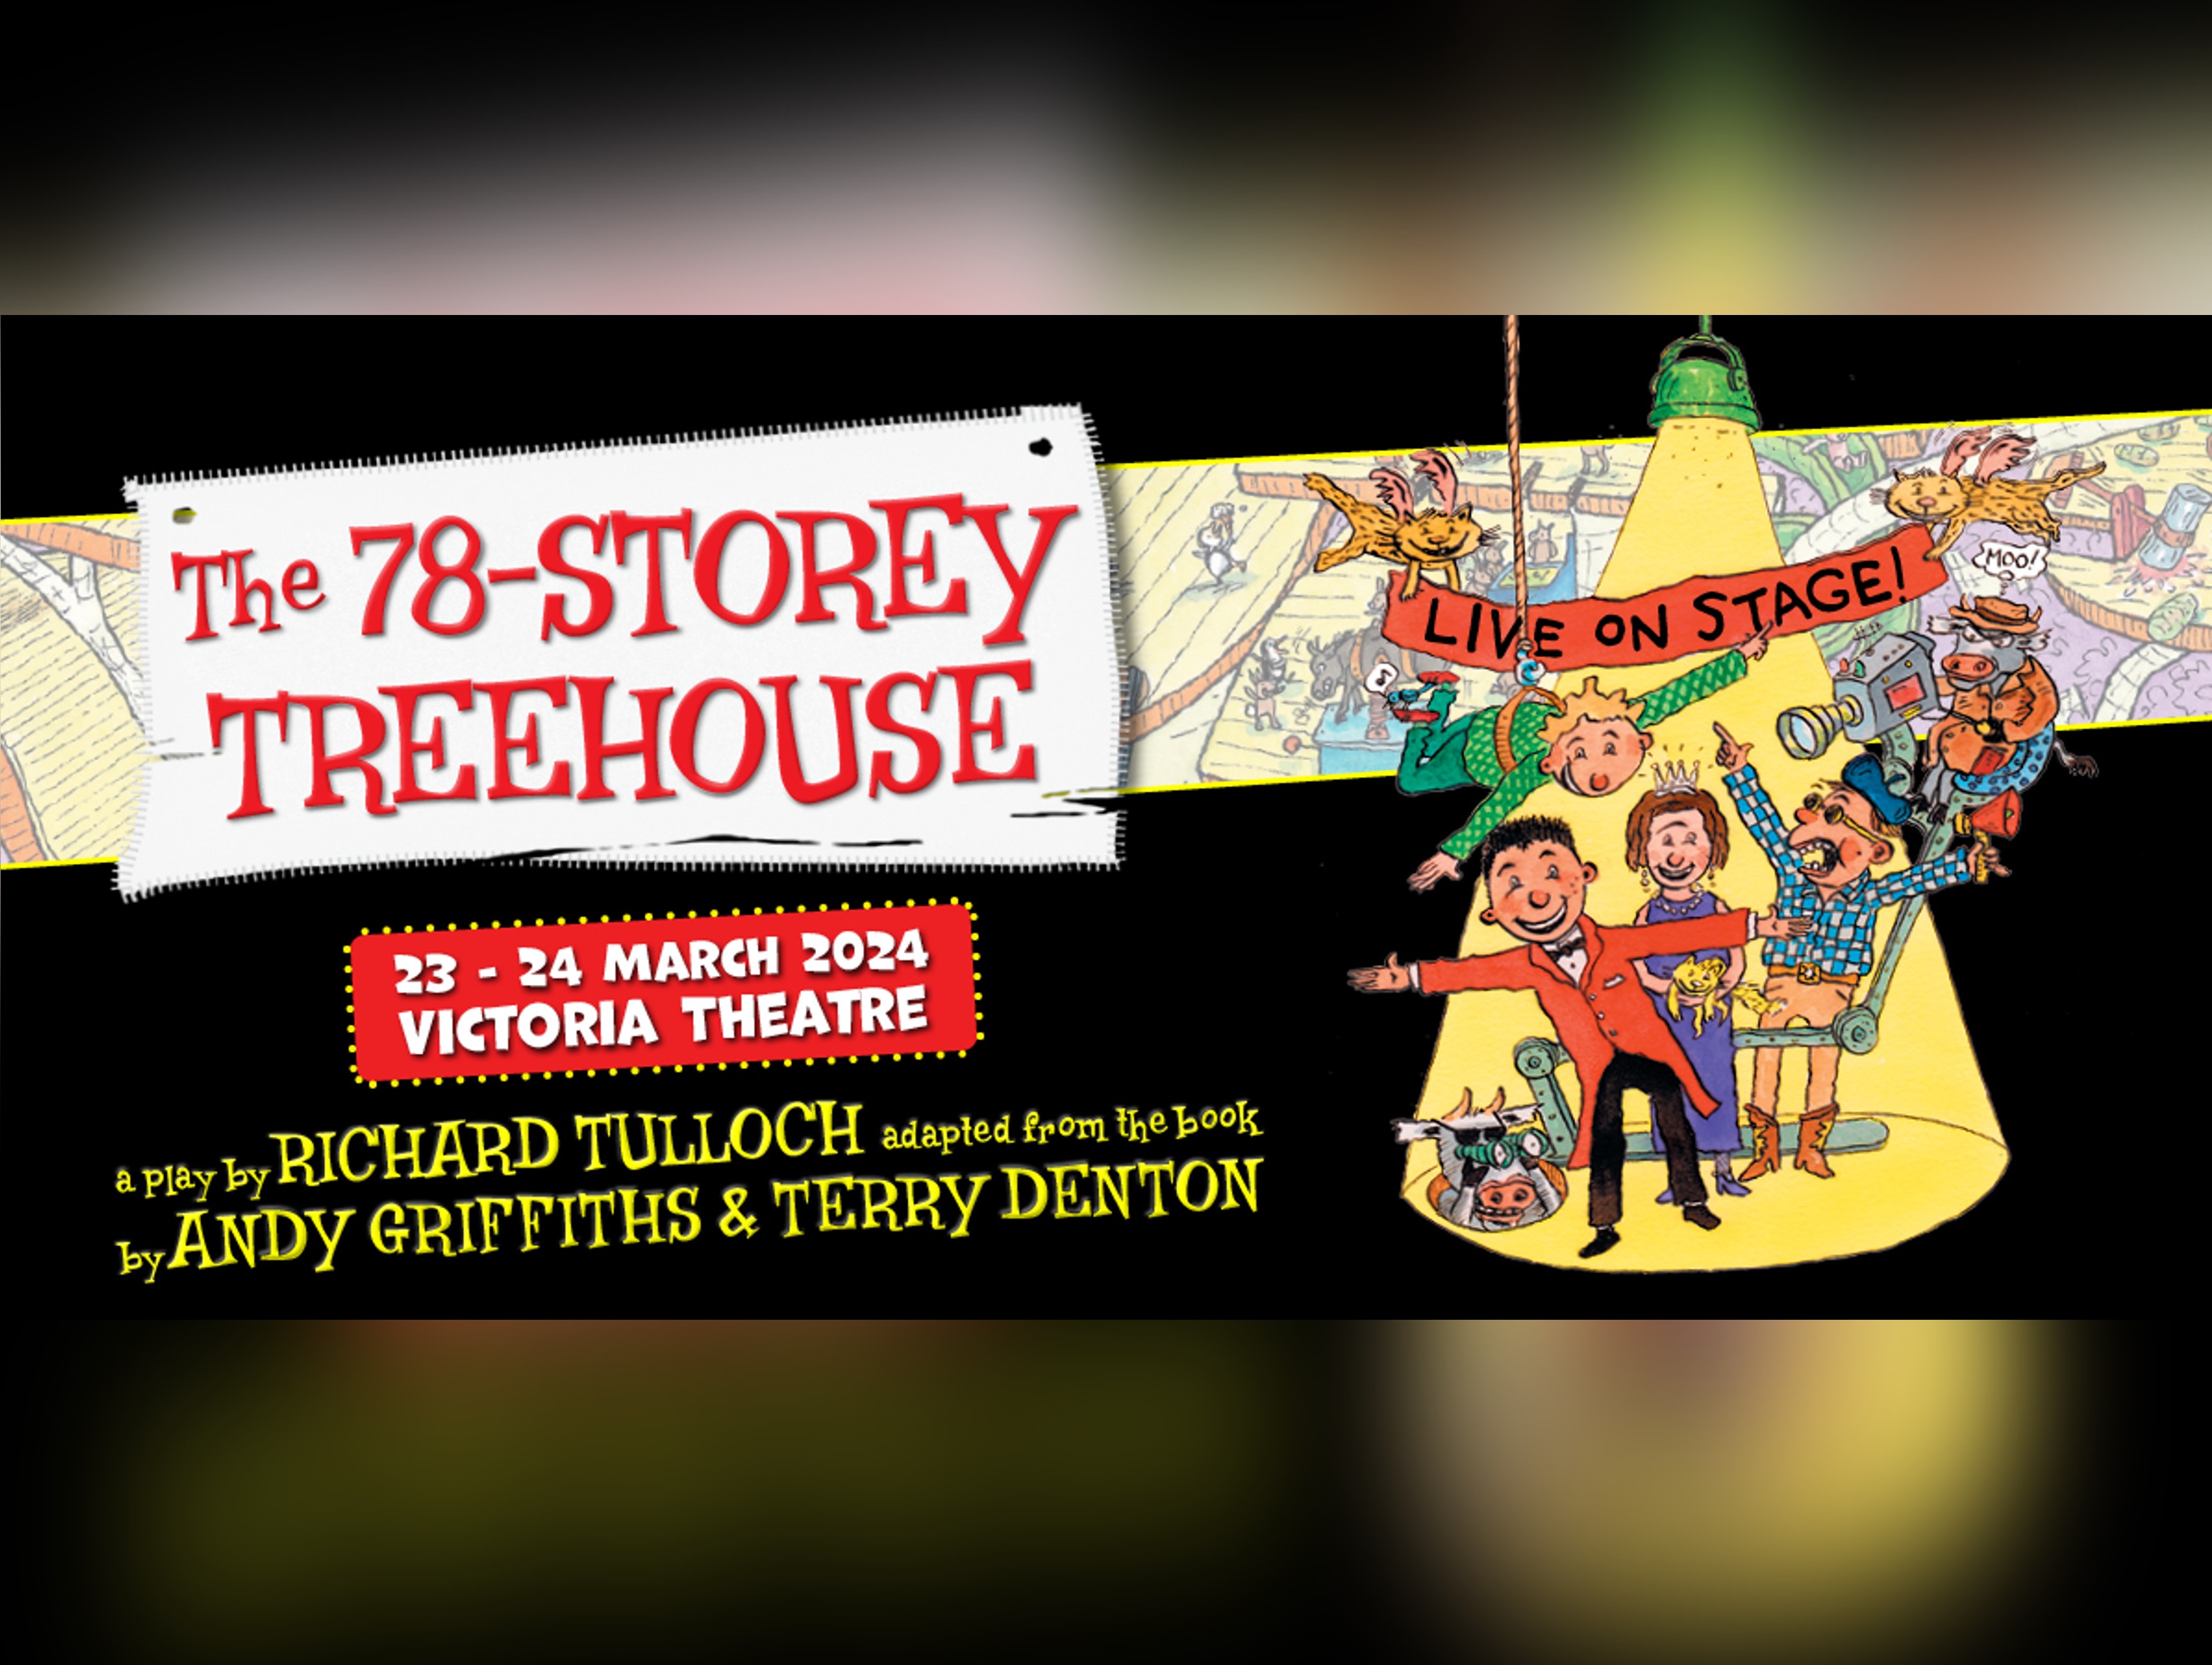 Andy Griffiths’ 78-Storey Treehouse: Live On Stage